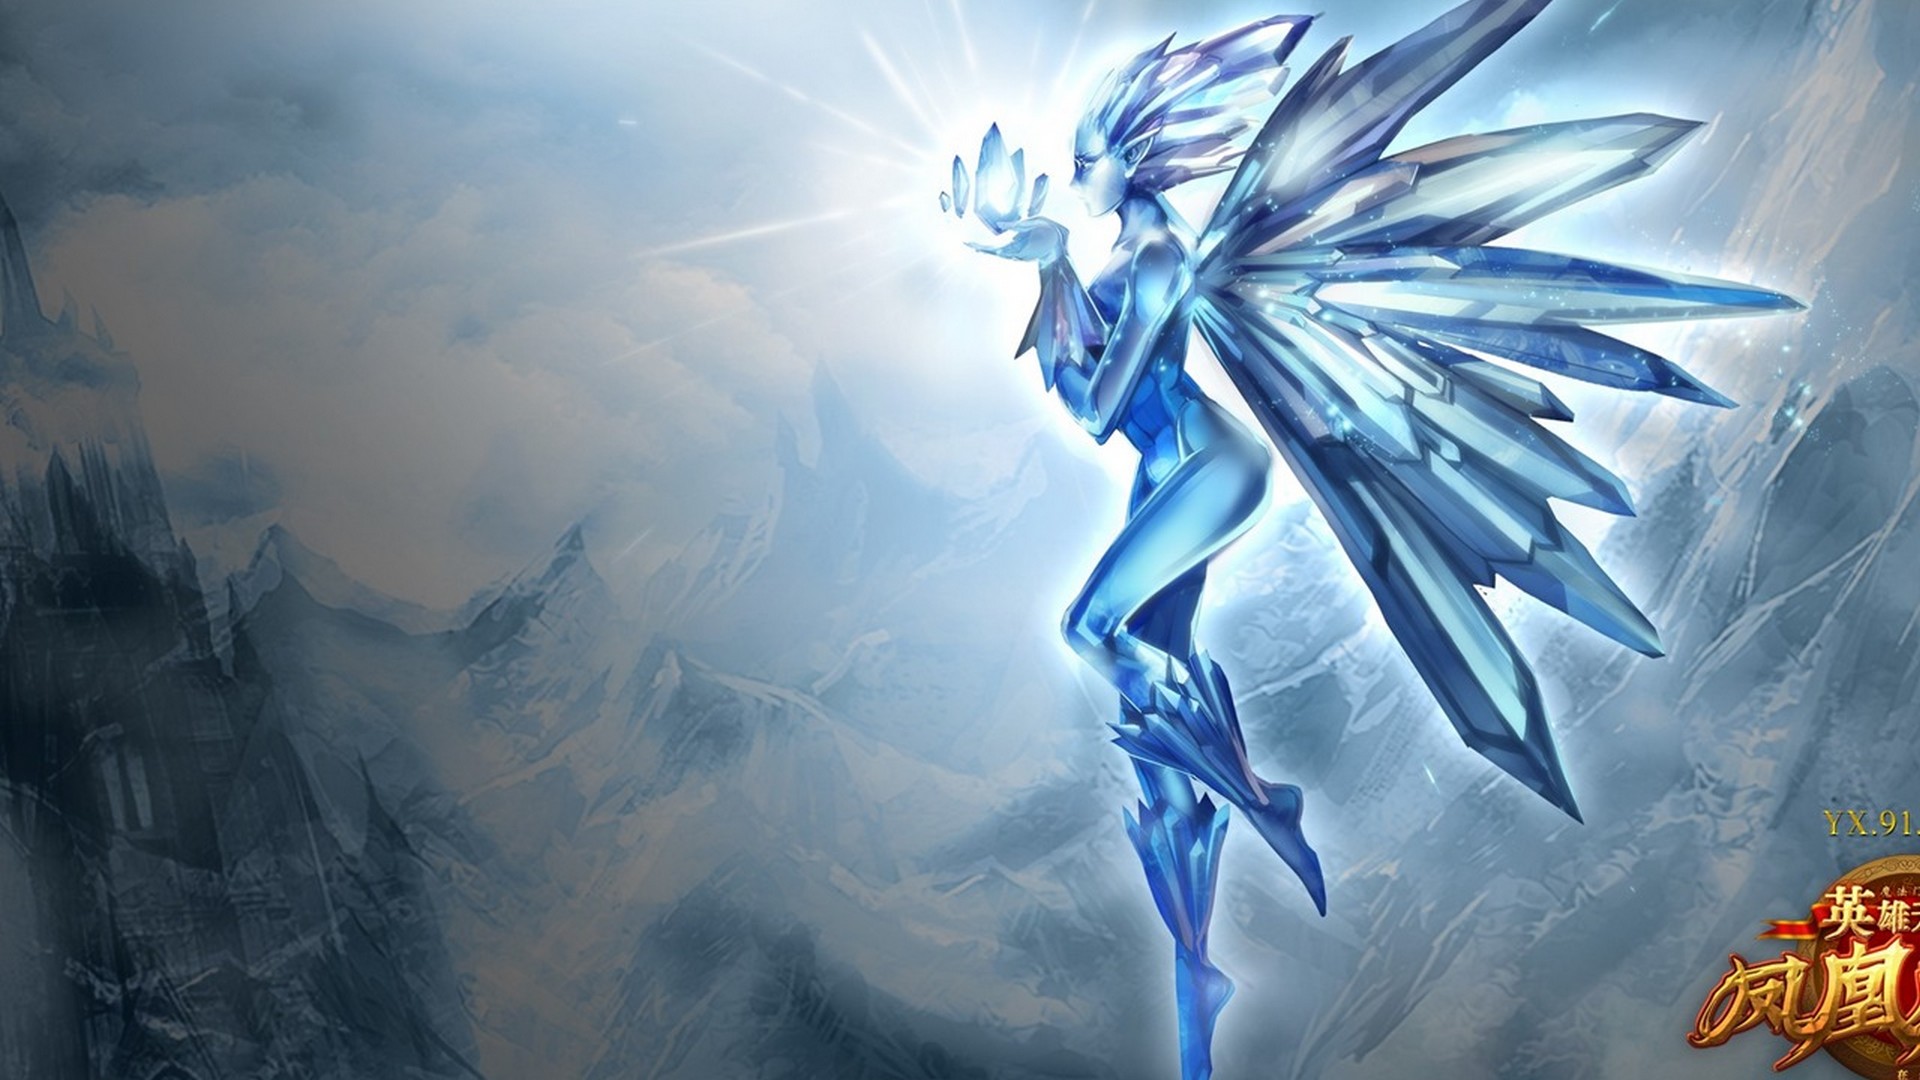 Best Ice Phoenix Wallpaper HD With Resolution 1920X1080 pixel. You can make this wallpaper for your Desktop Computer Backgrounds, Mac Wallpapers, Android Lock screen or iPhone Screensavers